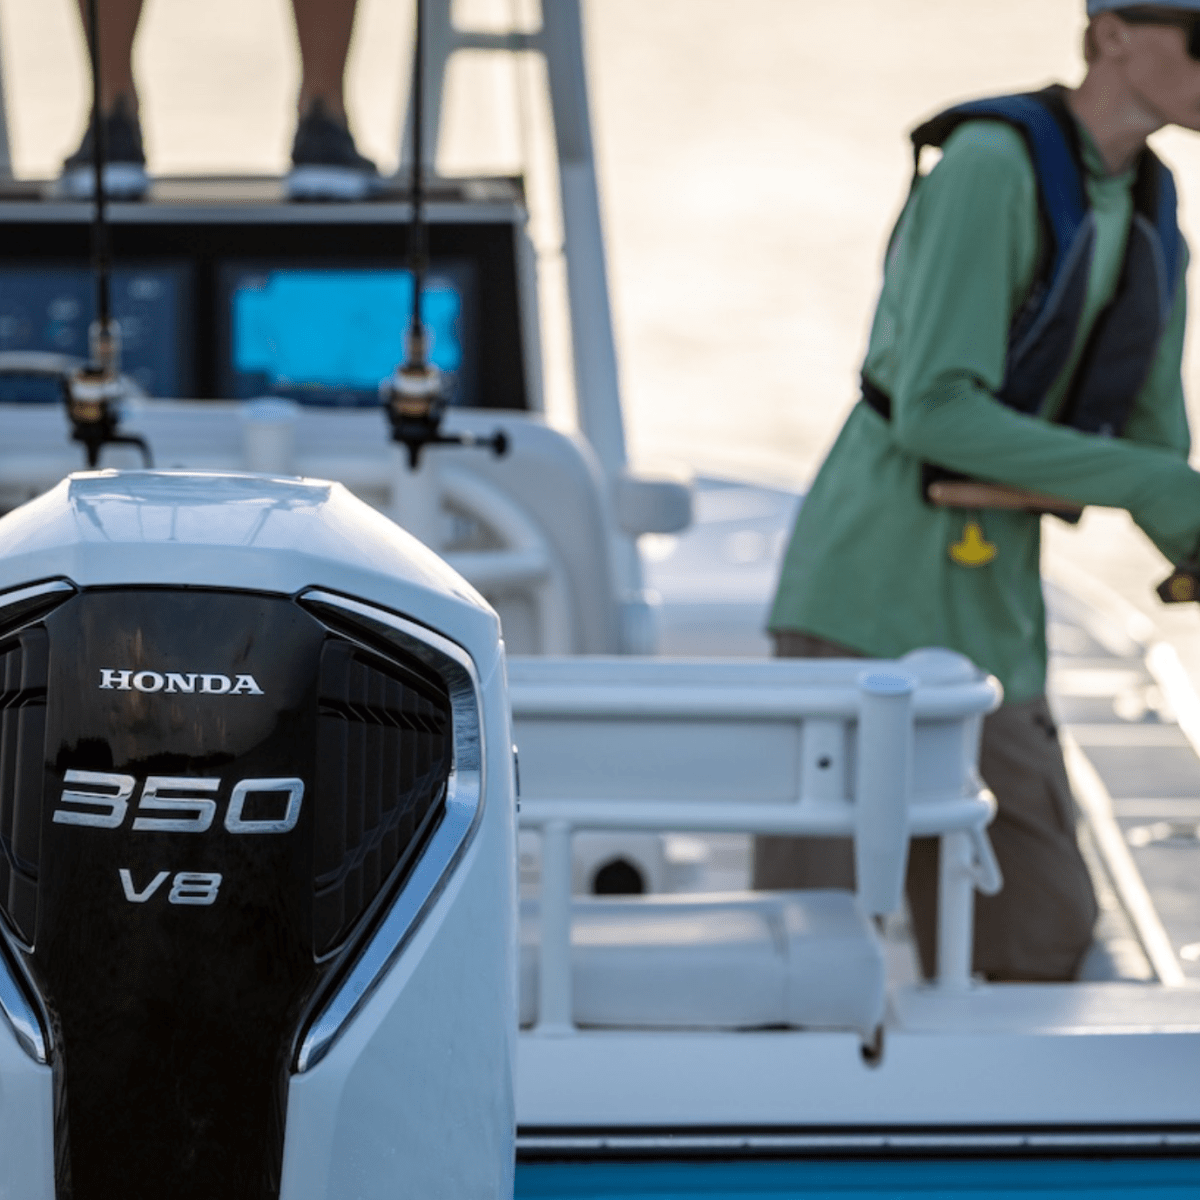 Honda Announces the BF350, Its First V8 Outboard - Soundings Online